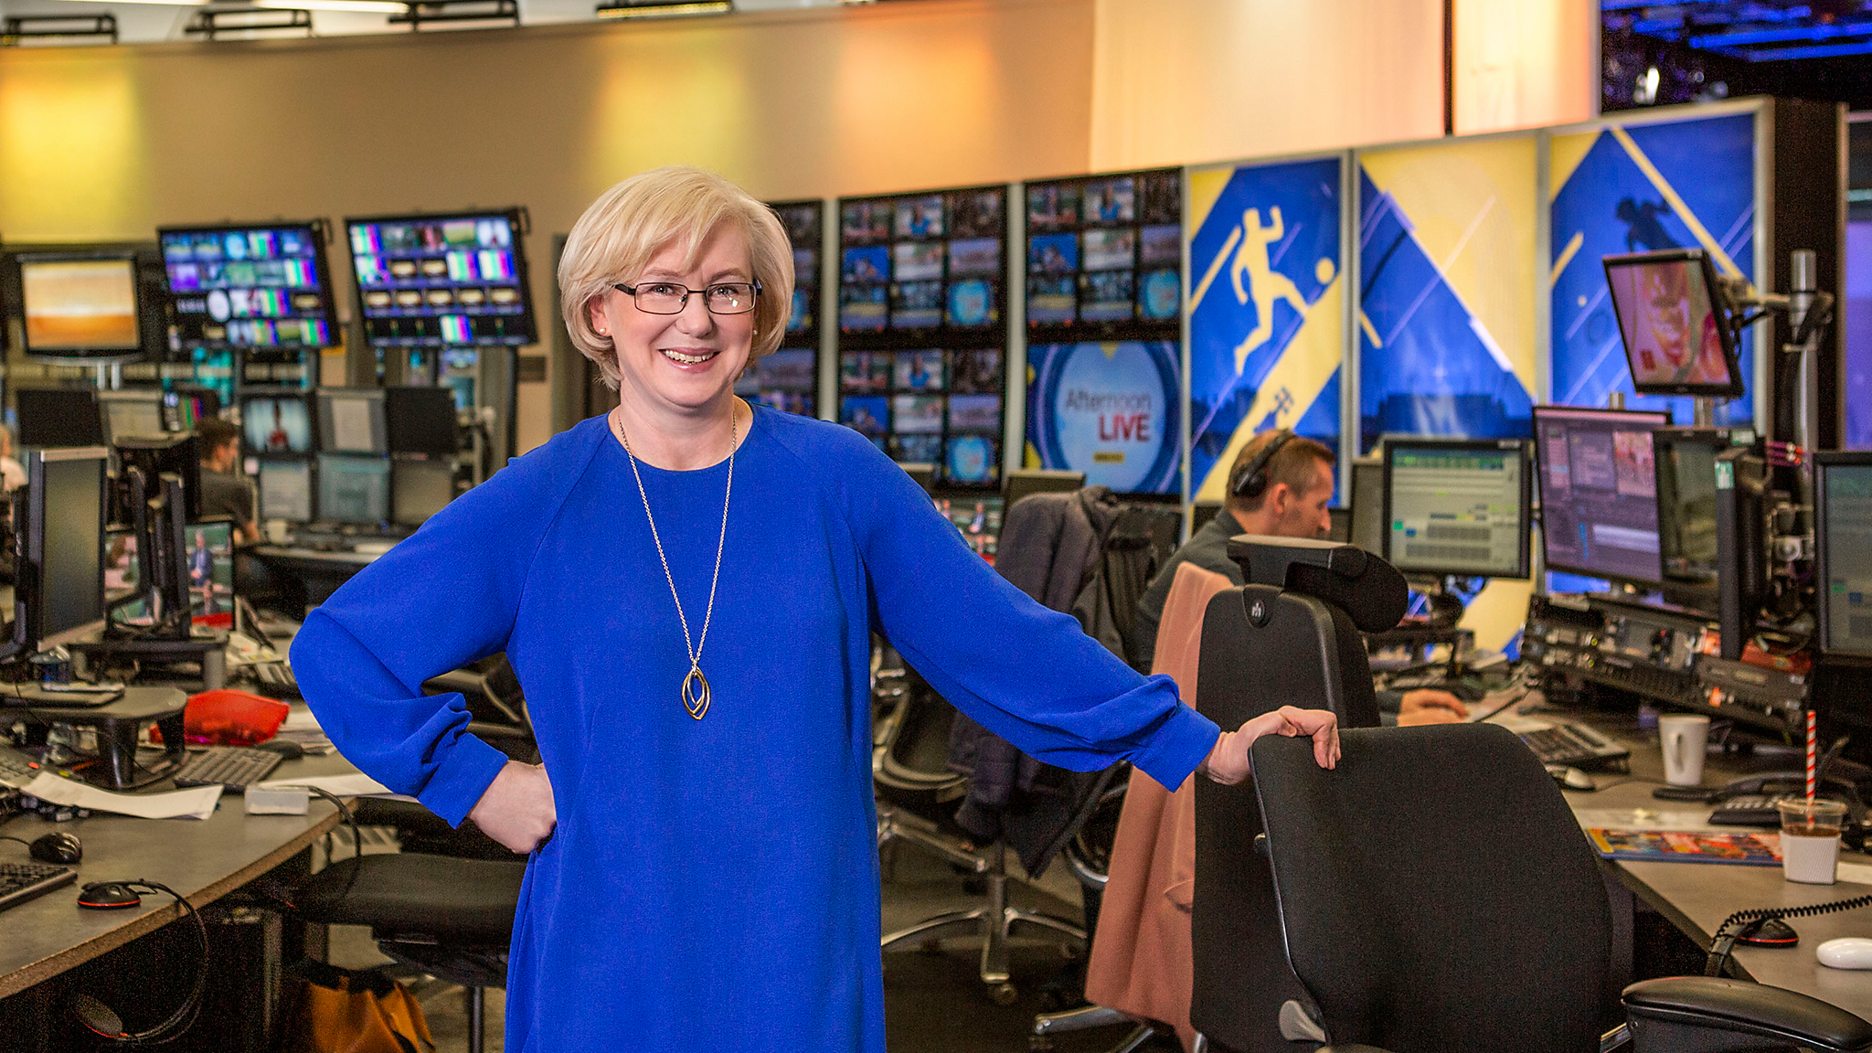 Barbara Slater announces her retirement from the BBC after 40 years